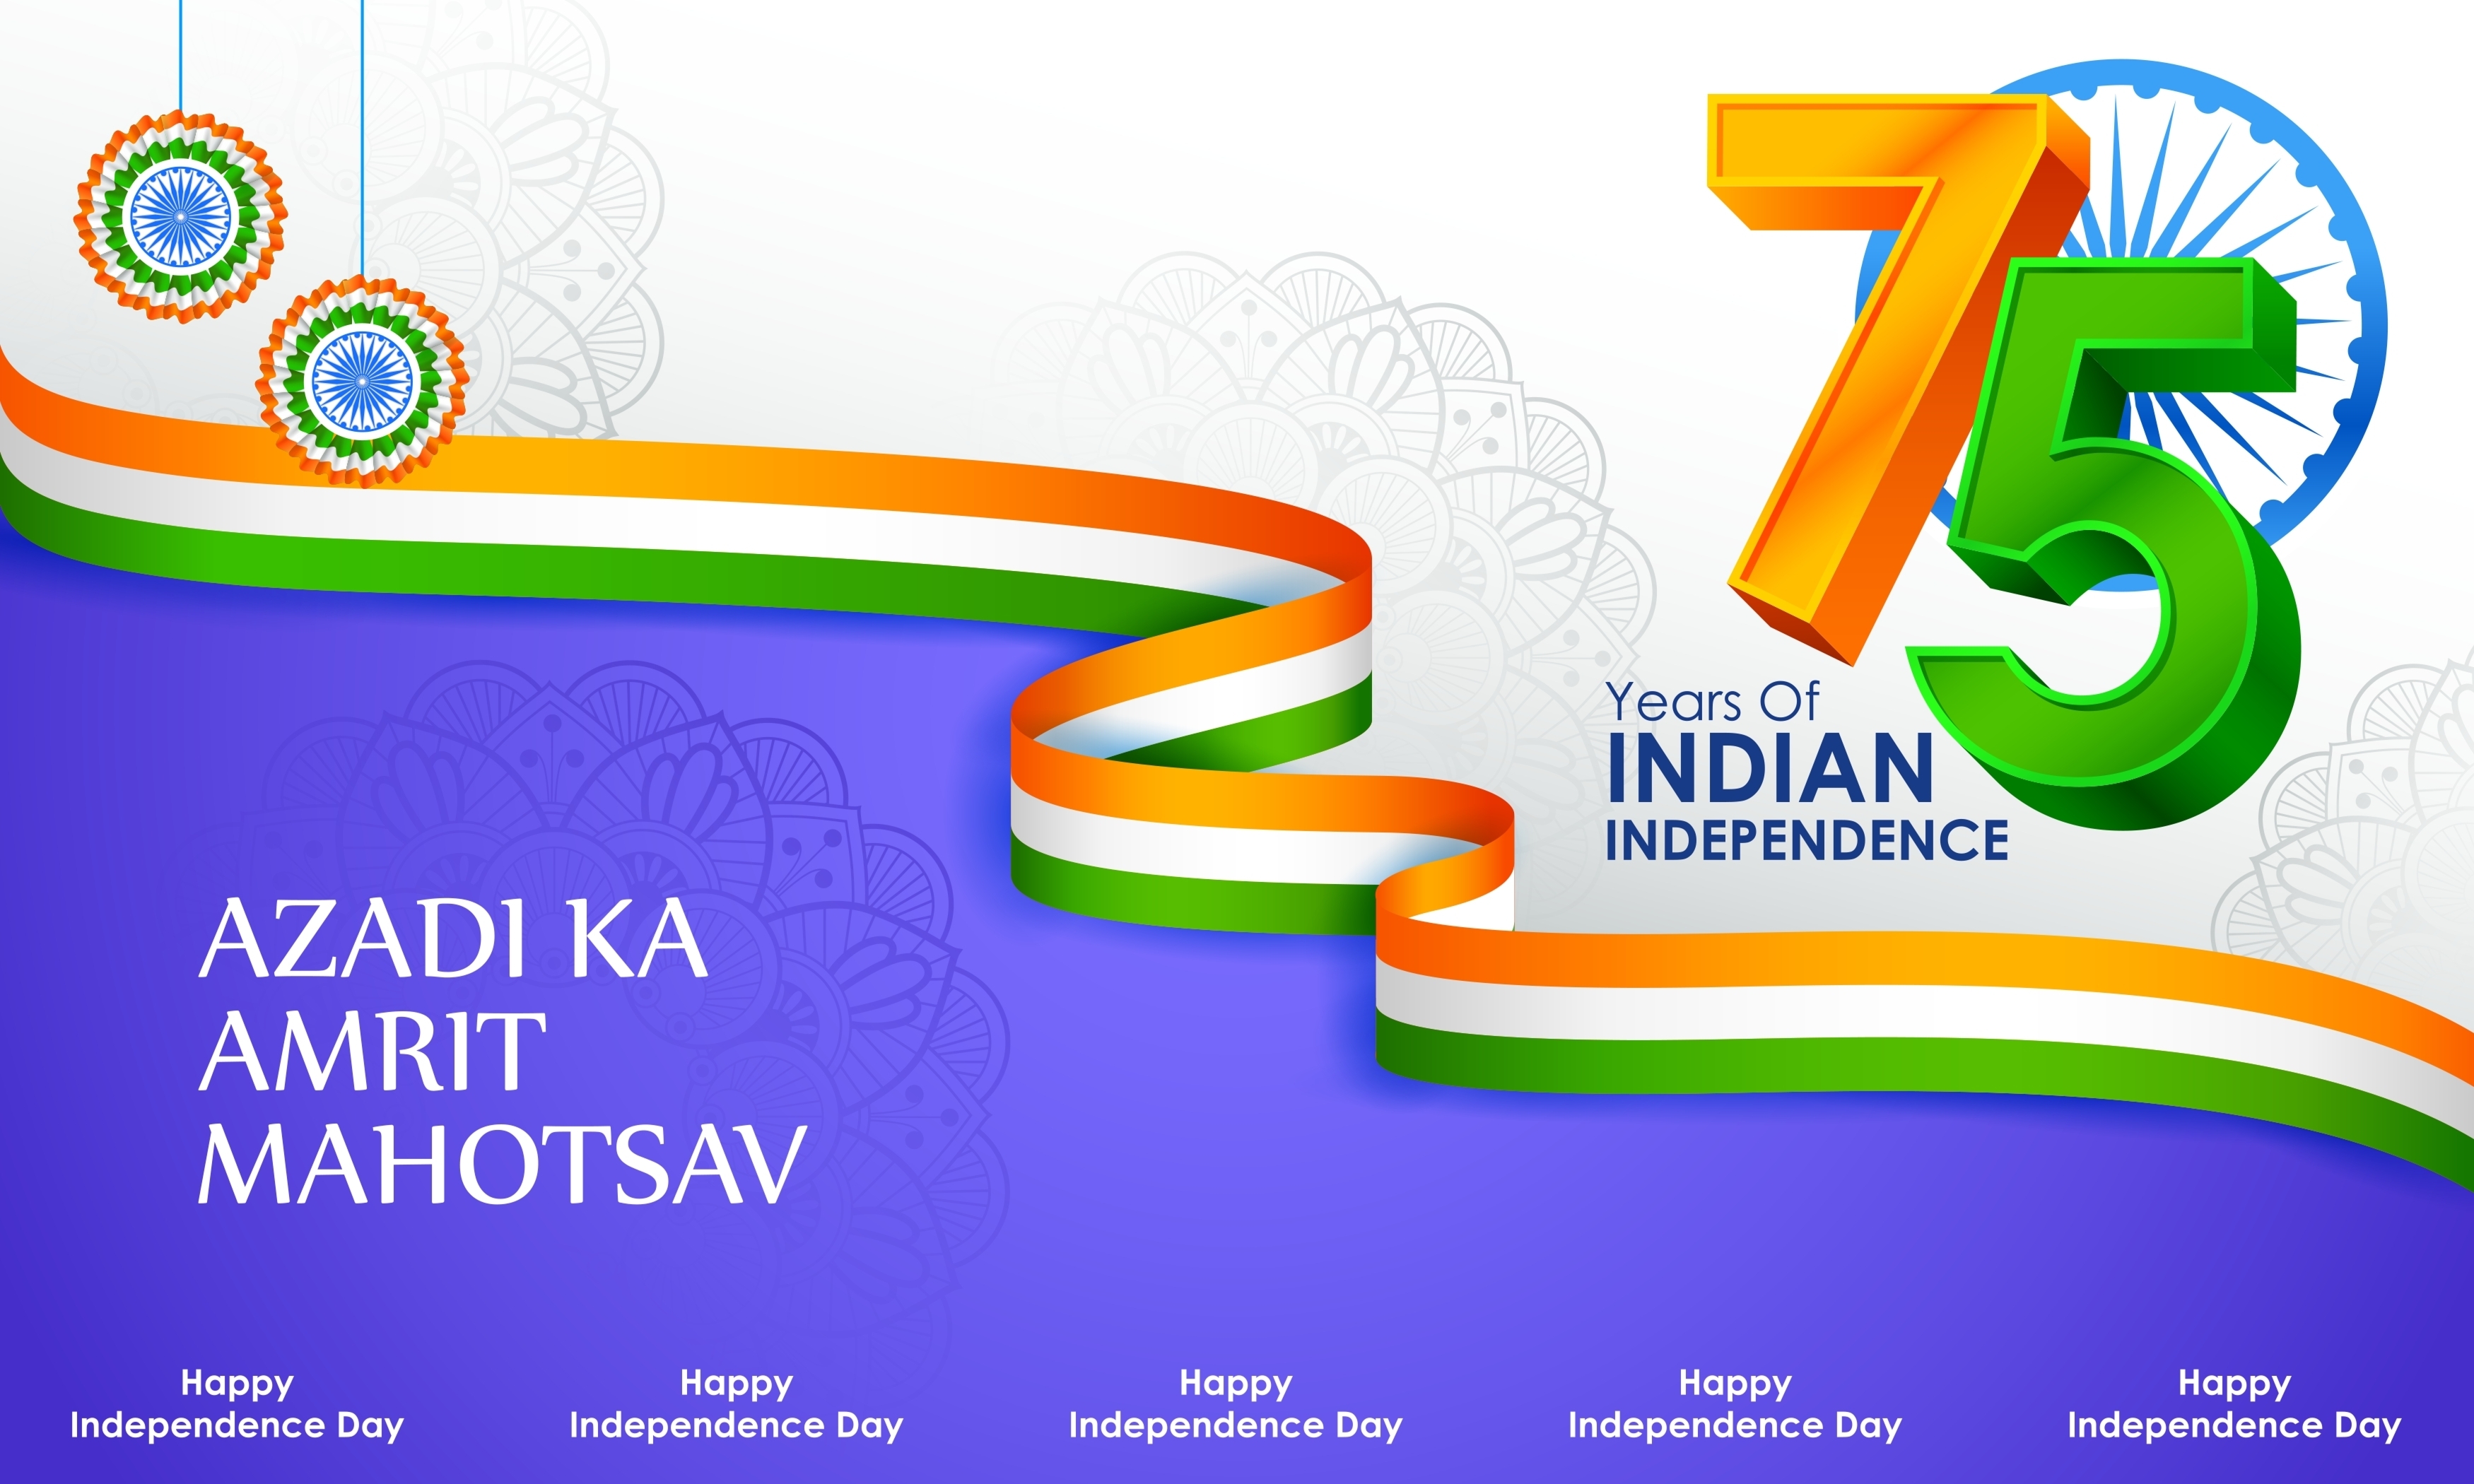 Happy Independence Day 2022: Wishes, Messages, Image, Quotes, Logo and Slogans to Share and Celebrate India's Freedom